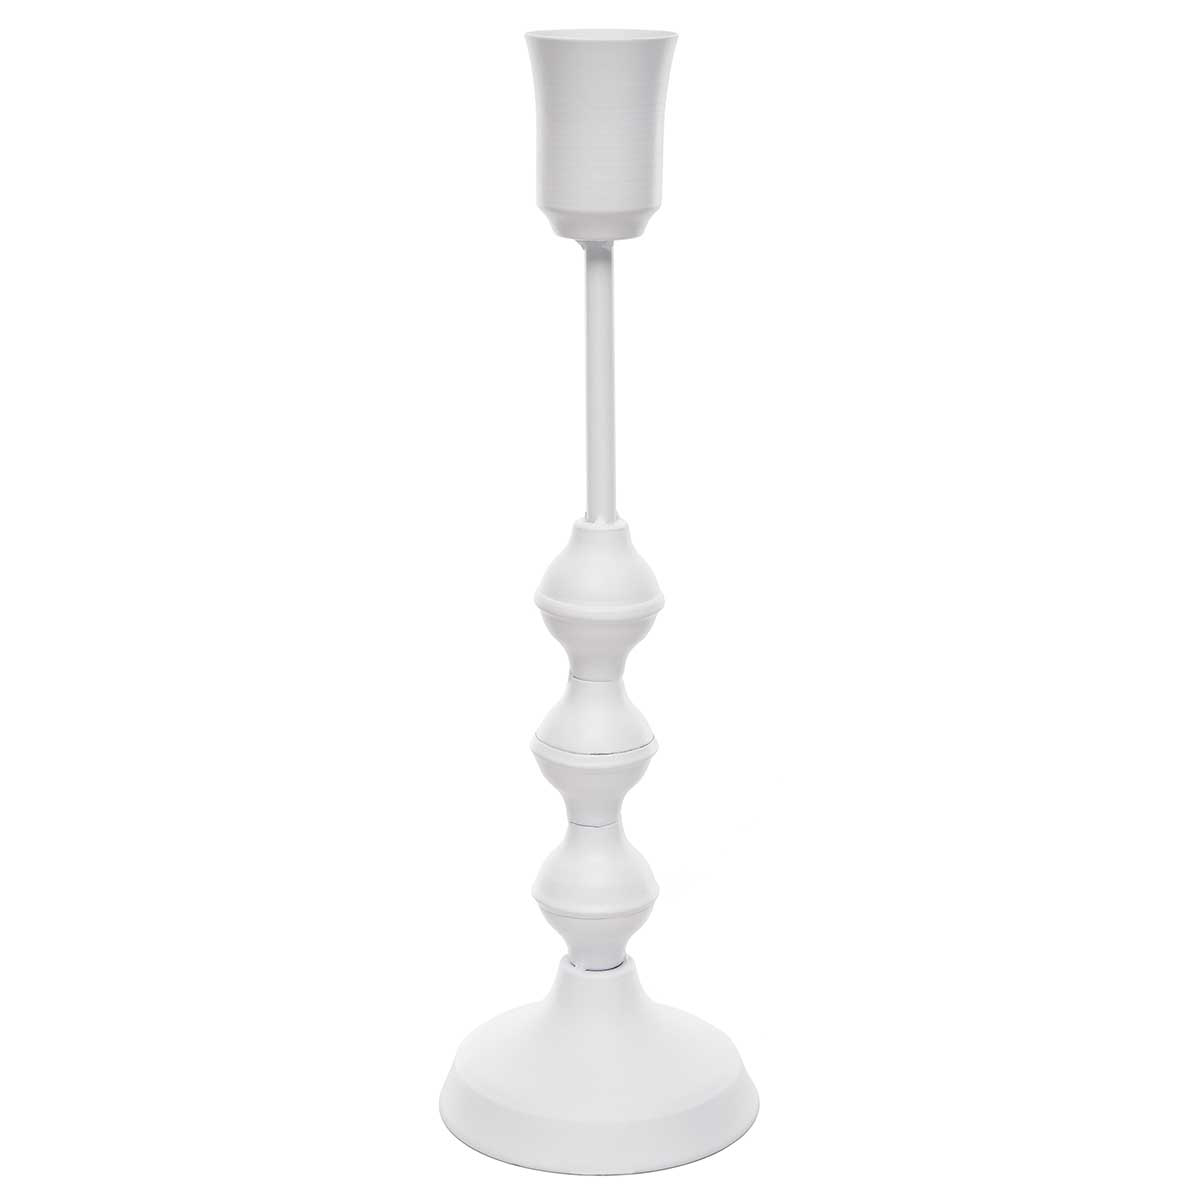 CANDLESTICK/HOLDER CURVES 4.5IN X 15IN MATTE WHITE METAL